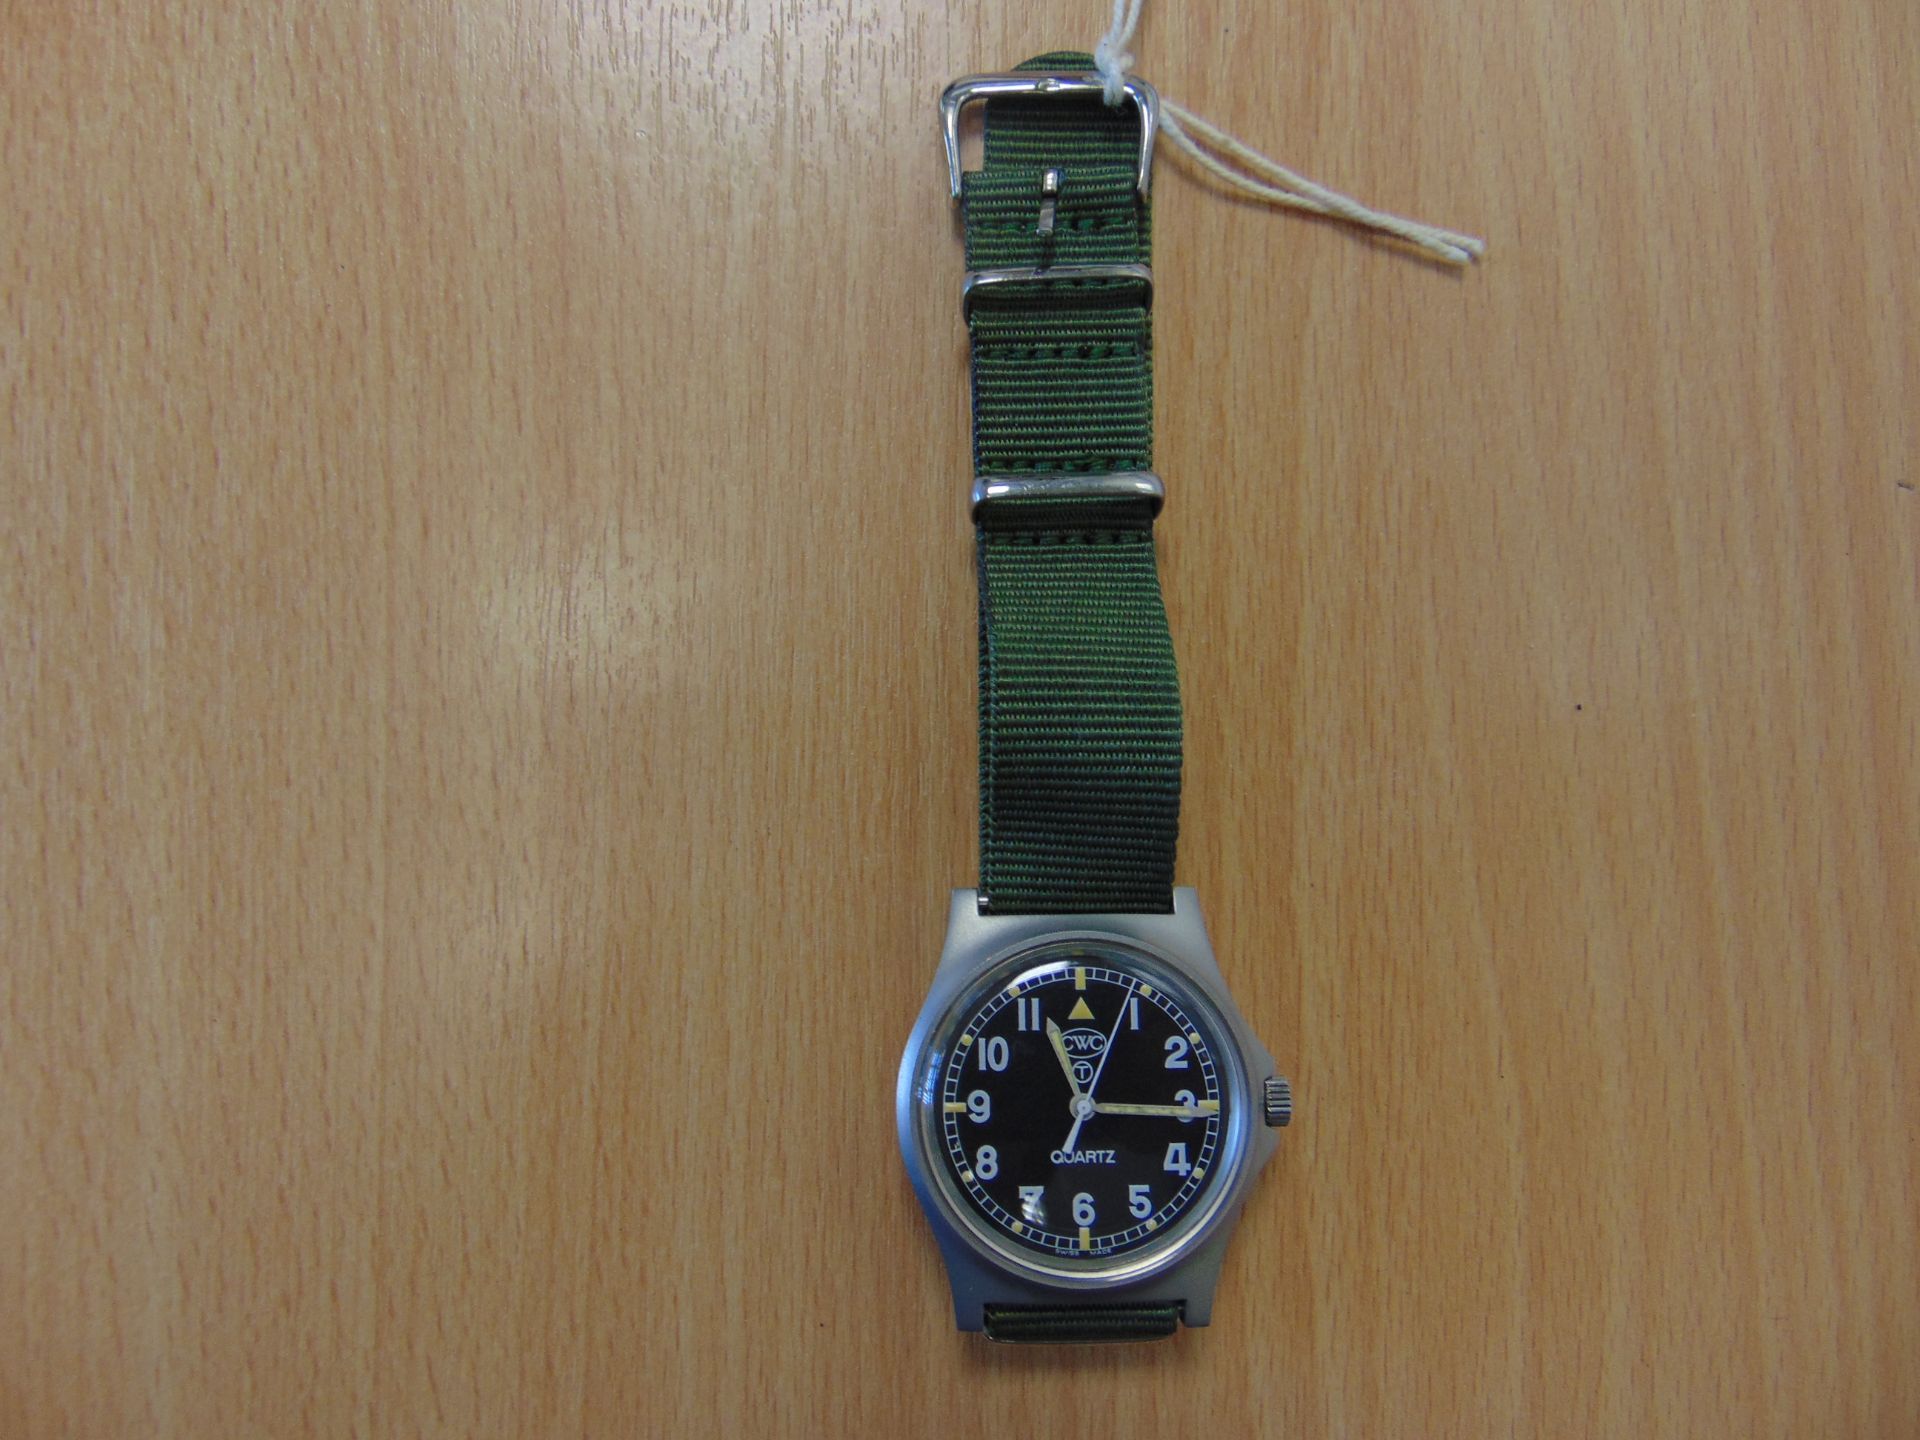 UNISSUED CWC W10 SERVICE WATCH -WATER RESISTENT TO 5ATM NATO MARKED DATED 2006 - Image 2 of 10